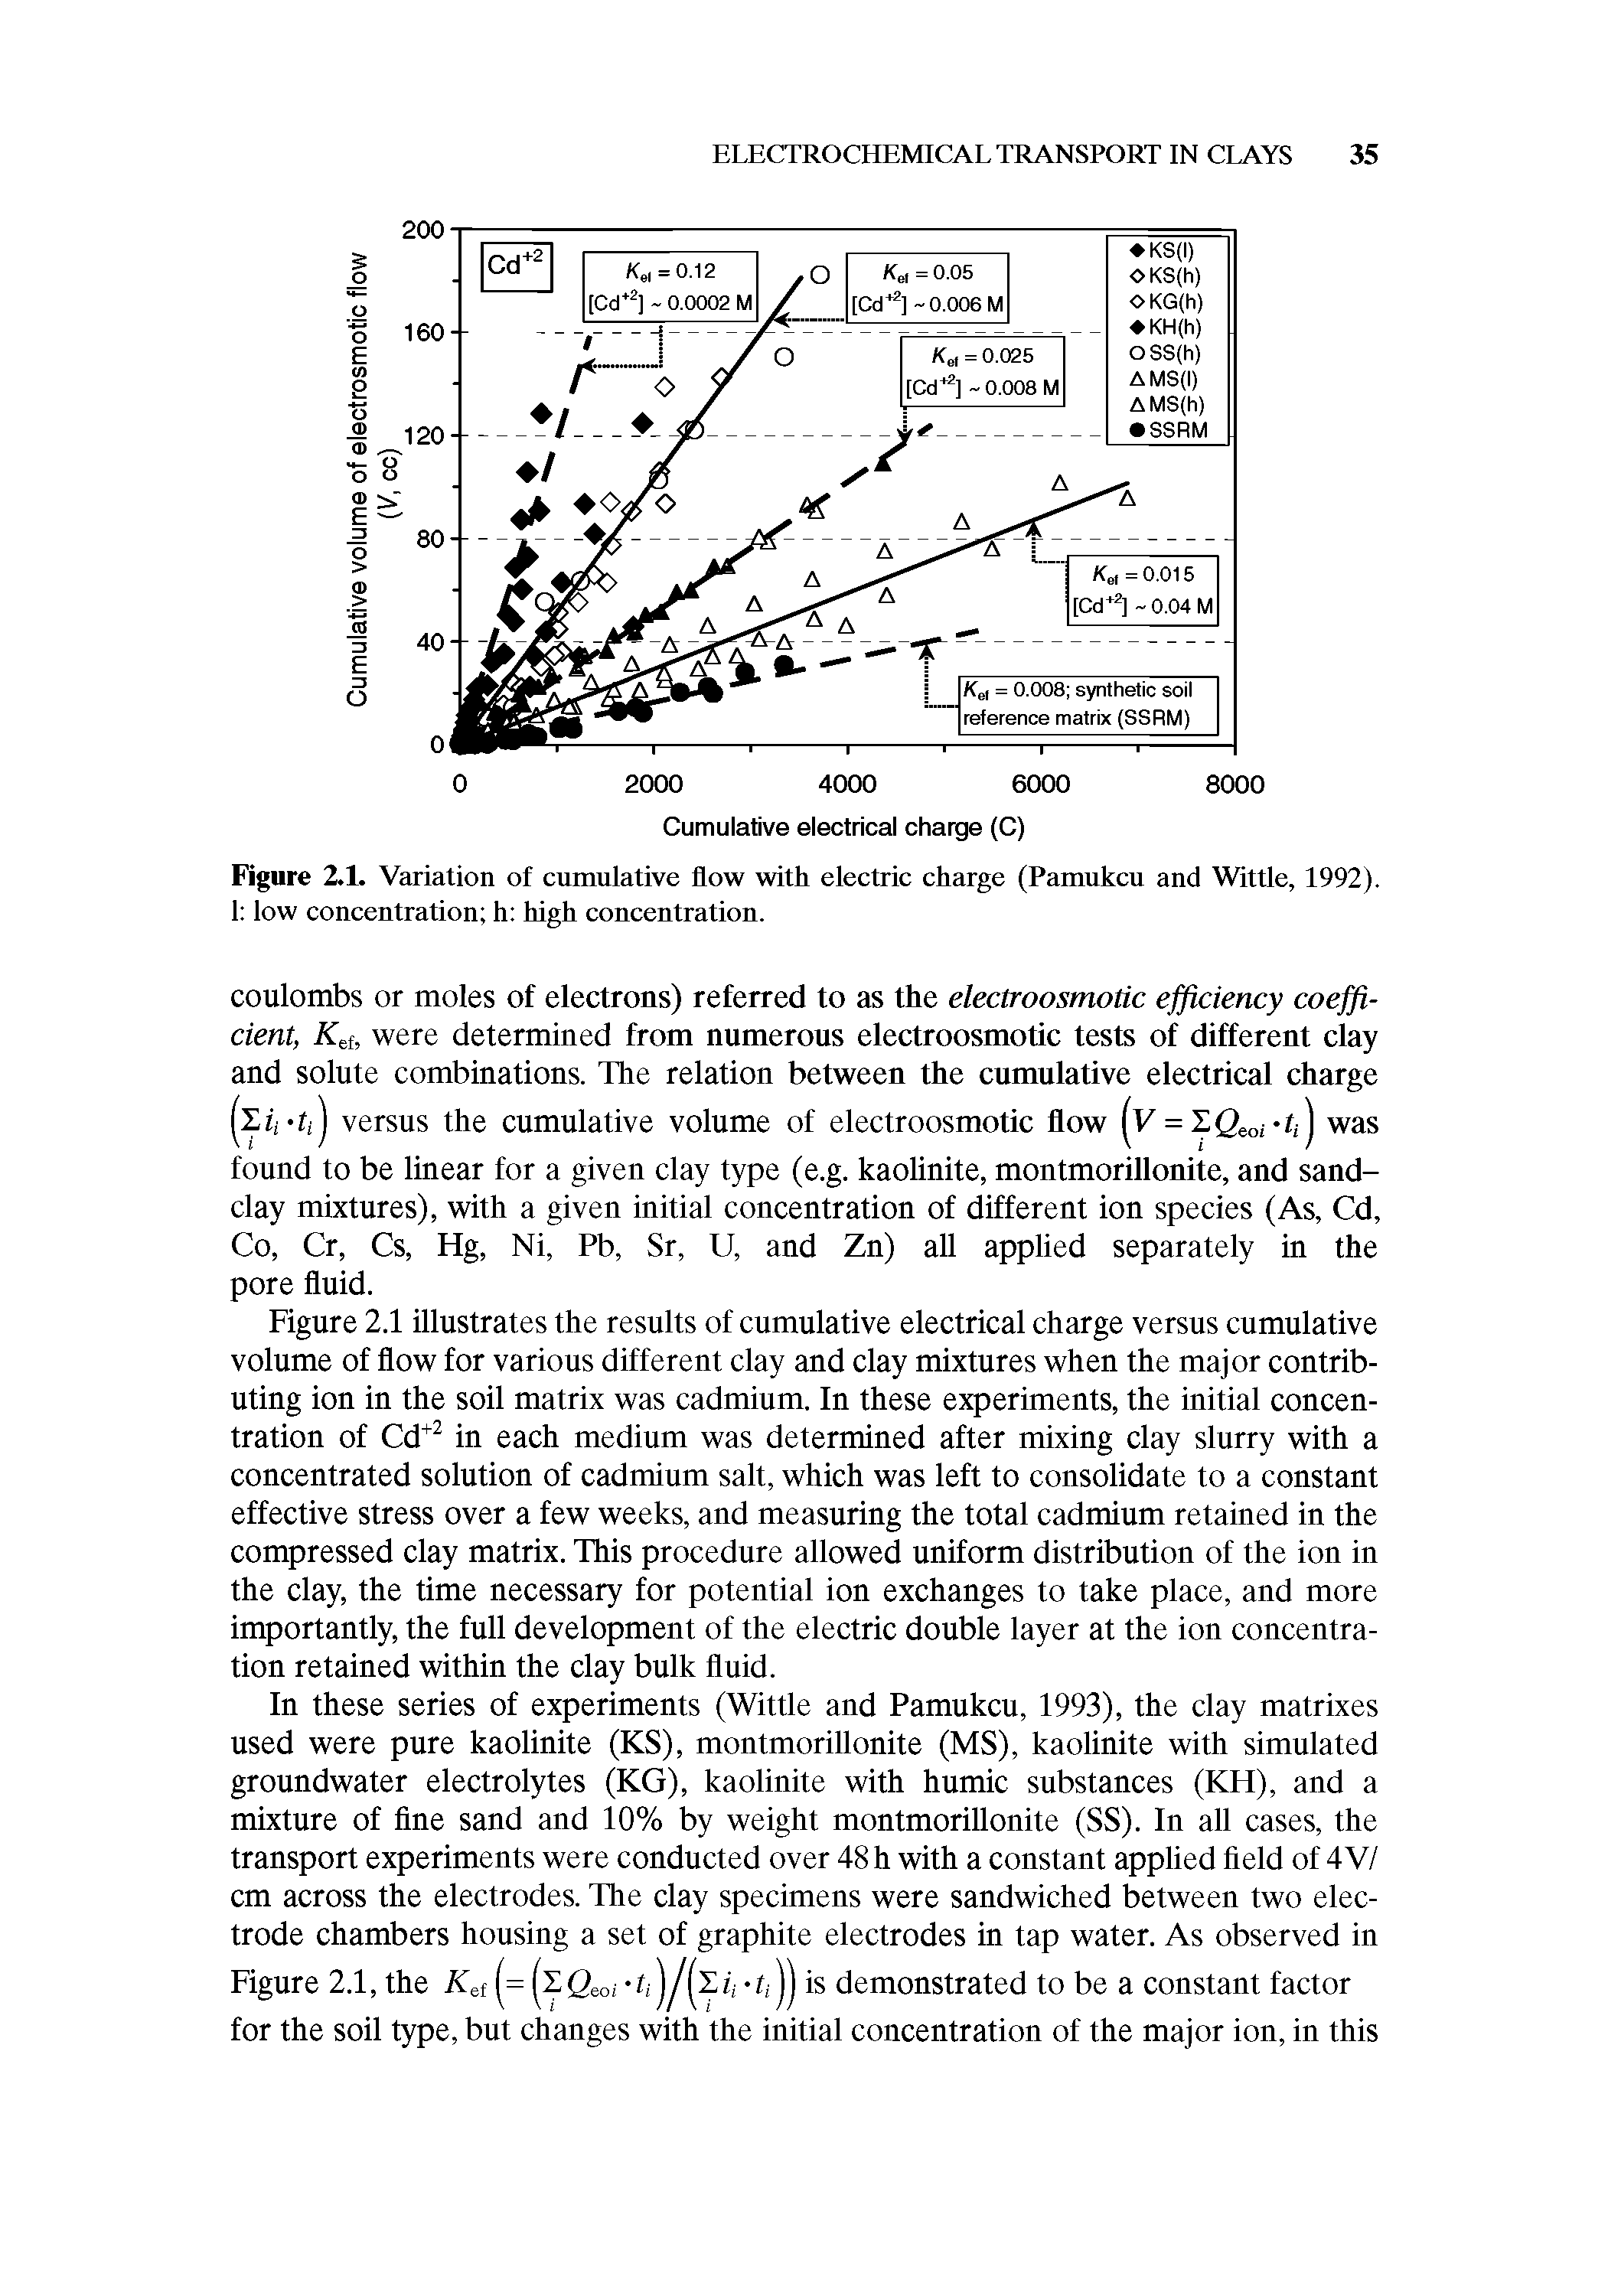 Figure 2.1. Variation of cumulative flow with electric charge (Pamukcu and Wittle, 1992). 1 low concentration h high concentration.